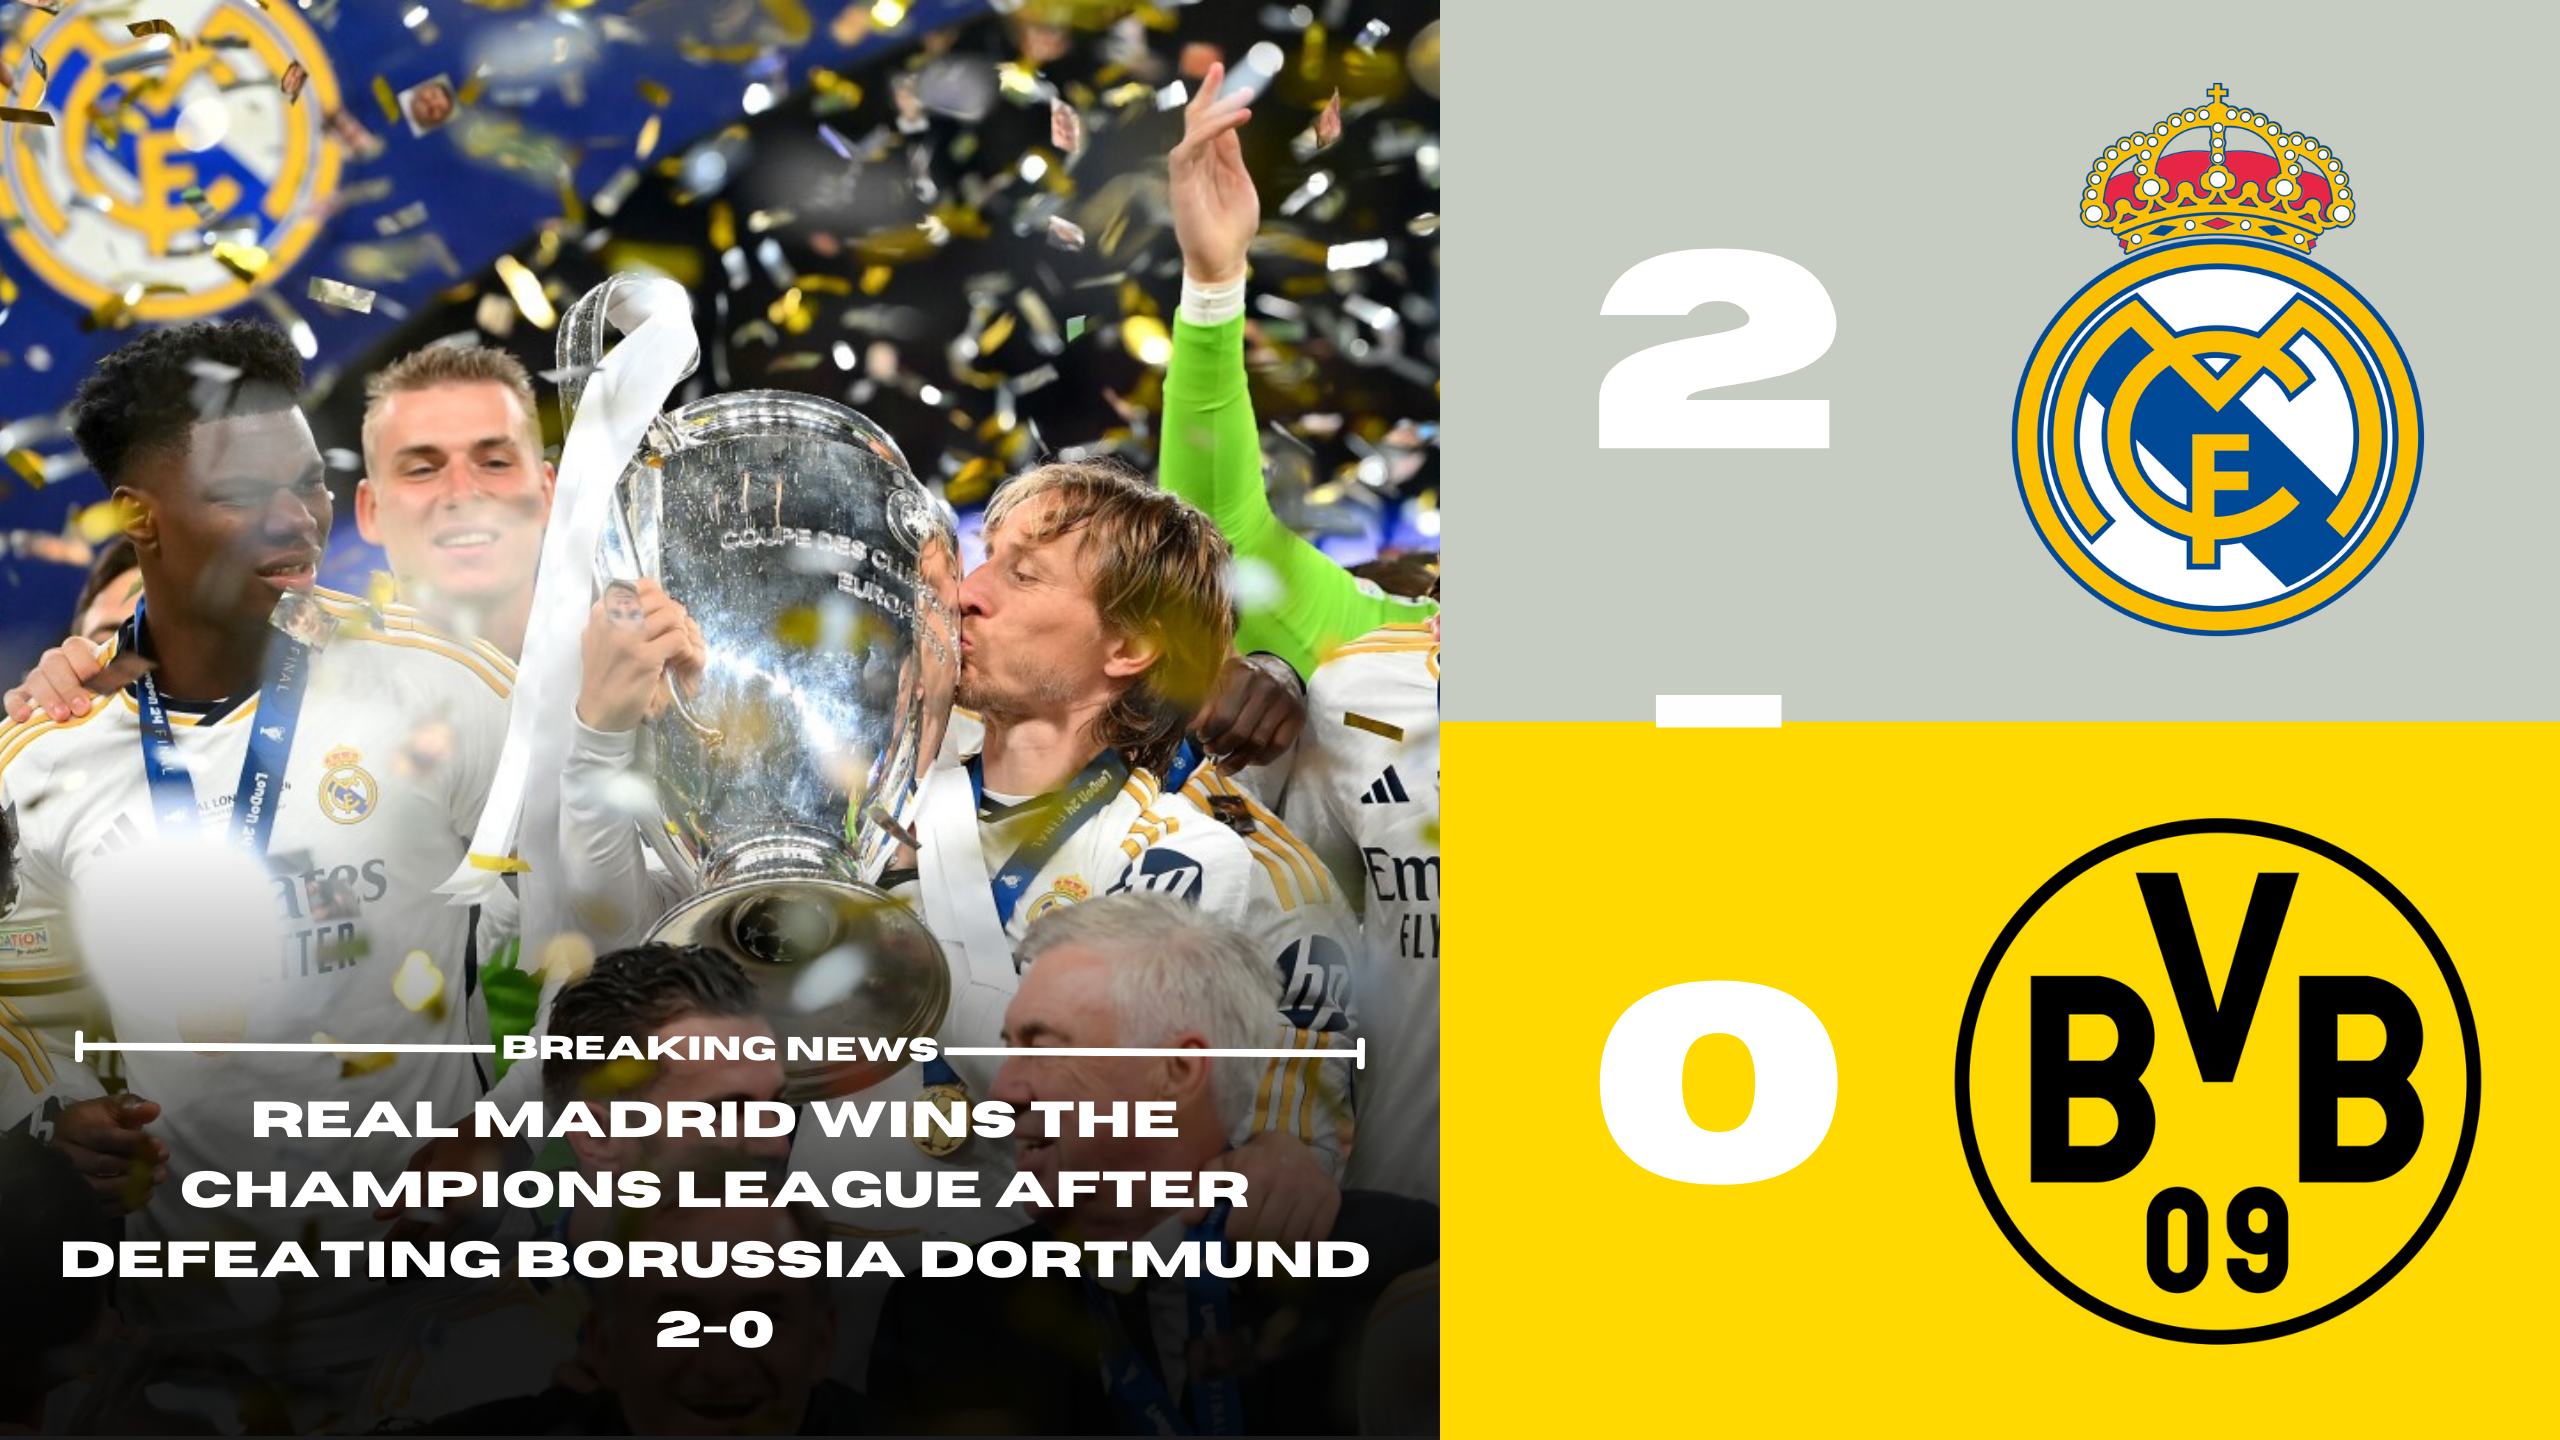 Real Madrid wins the Champions League after defeating Borussia Dortmund 2-0.